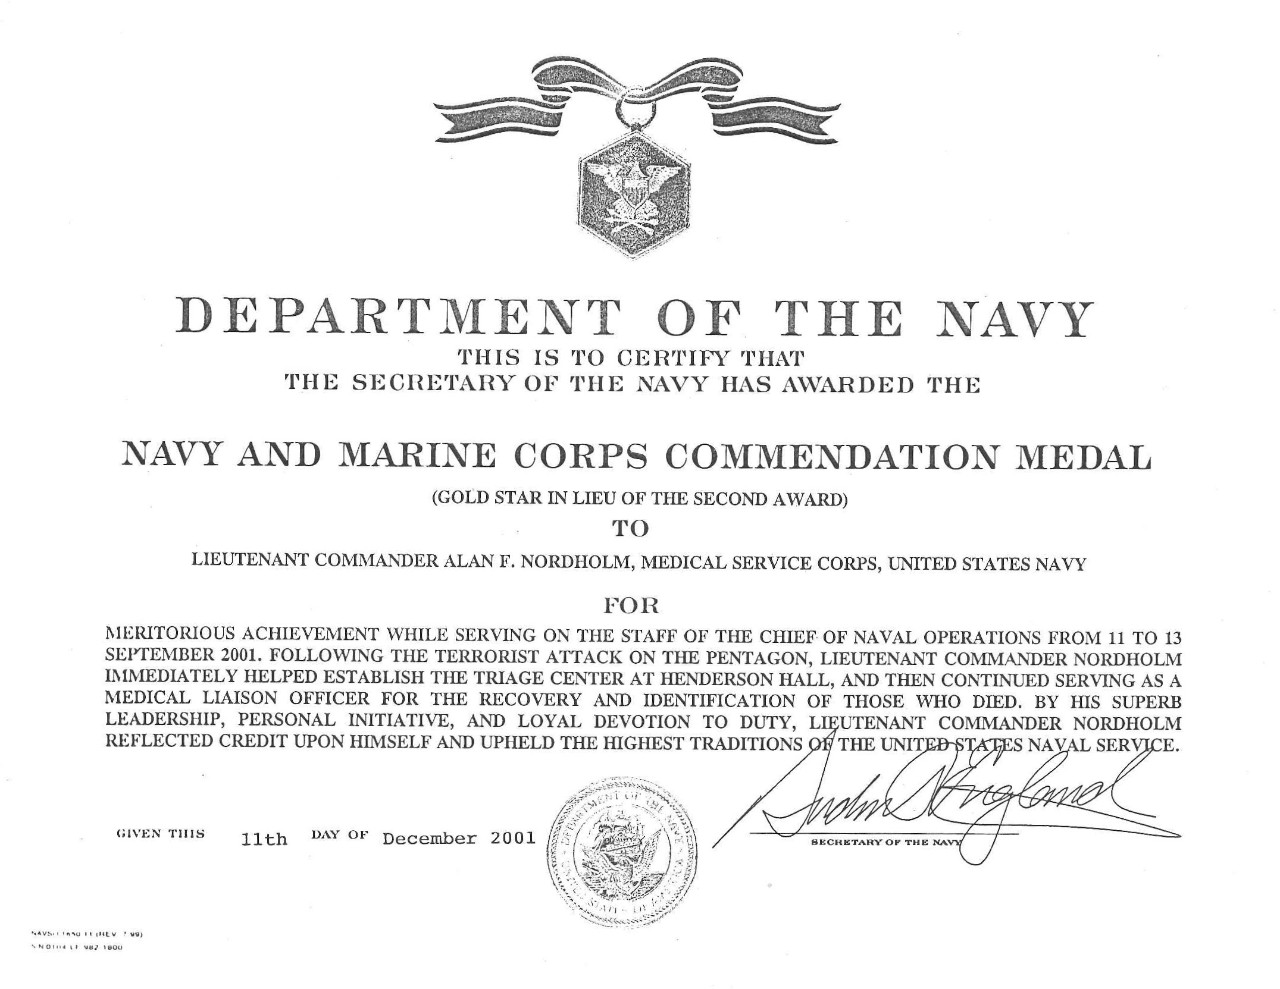 Nordholm, Alan LCDR Navy and Marine Corps Commendation Medal